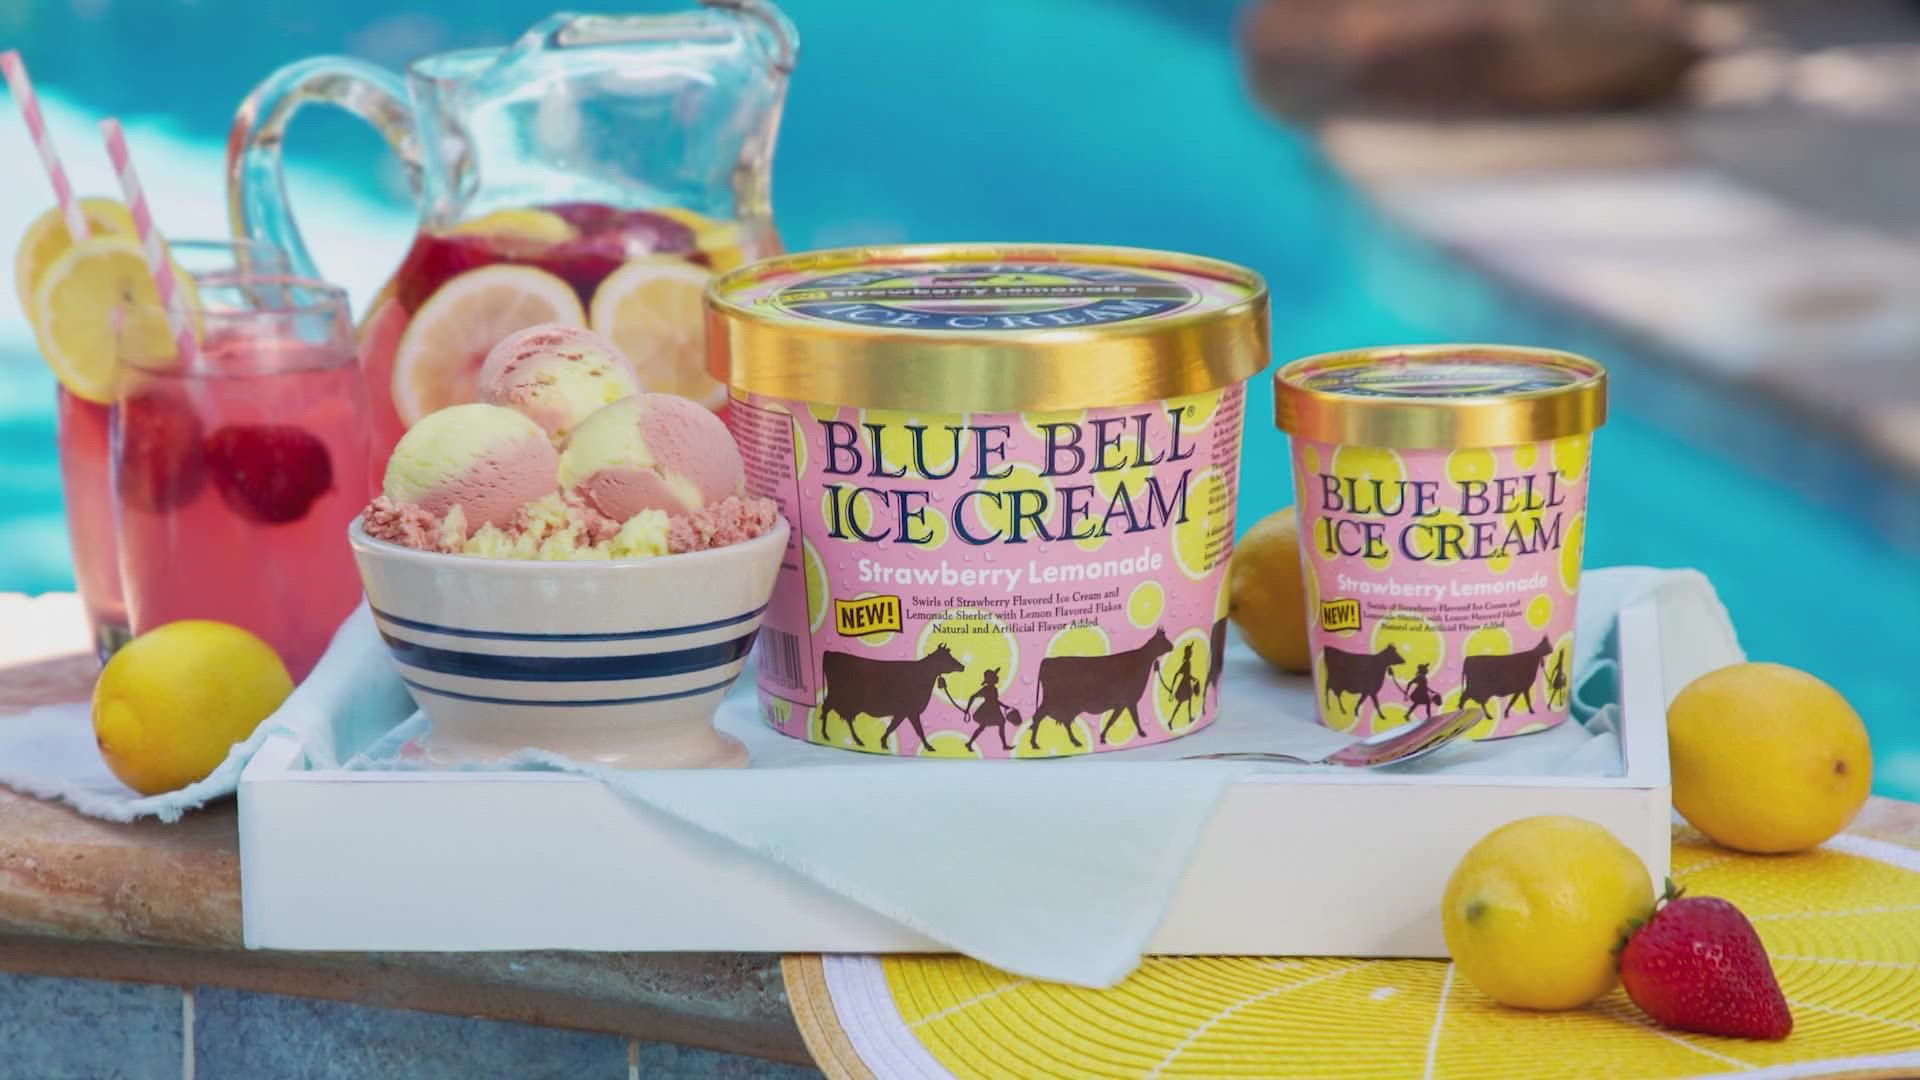 What do you get when you mix strawberries and lemonade? The new Blue Bell ice cream.